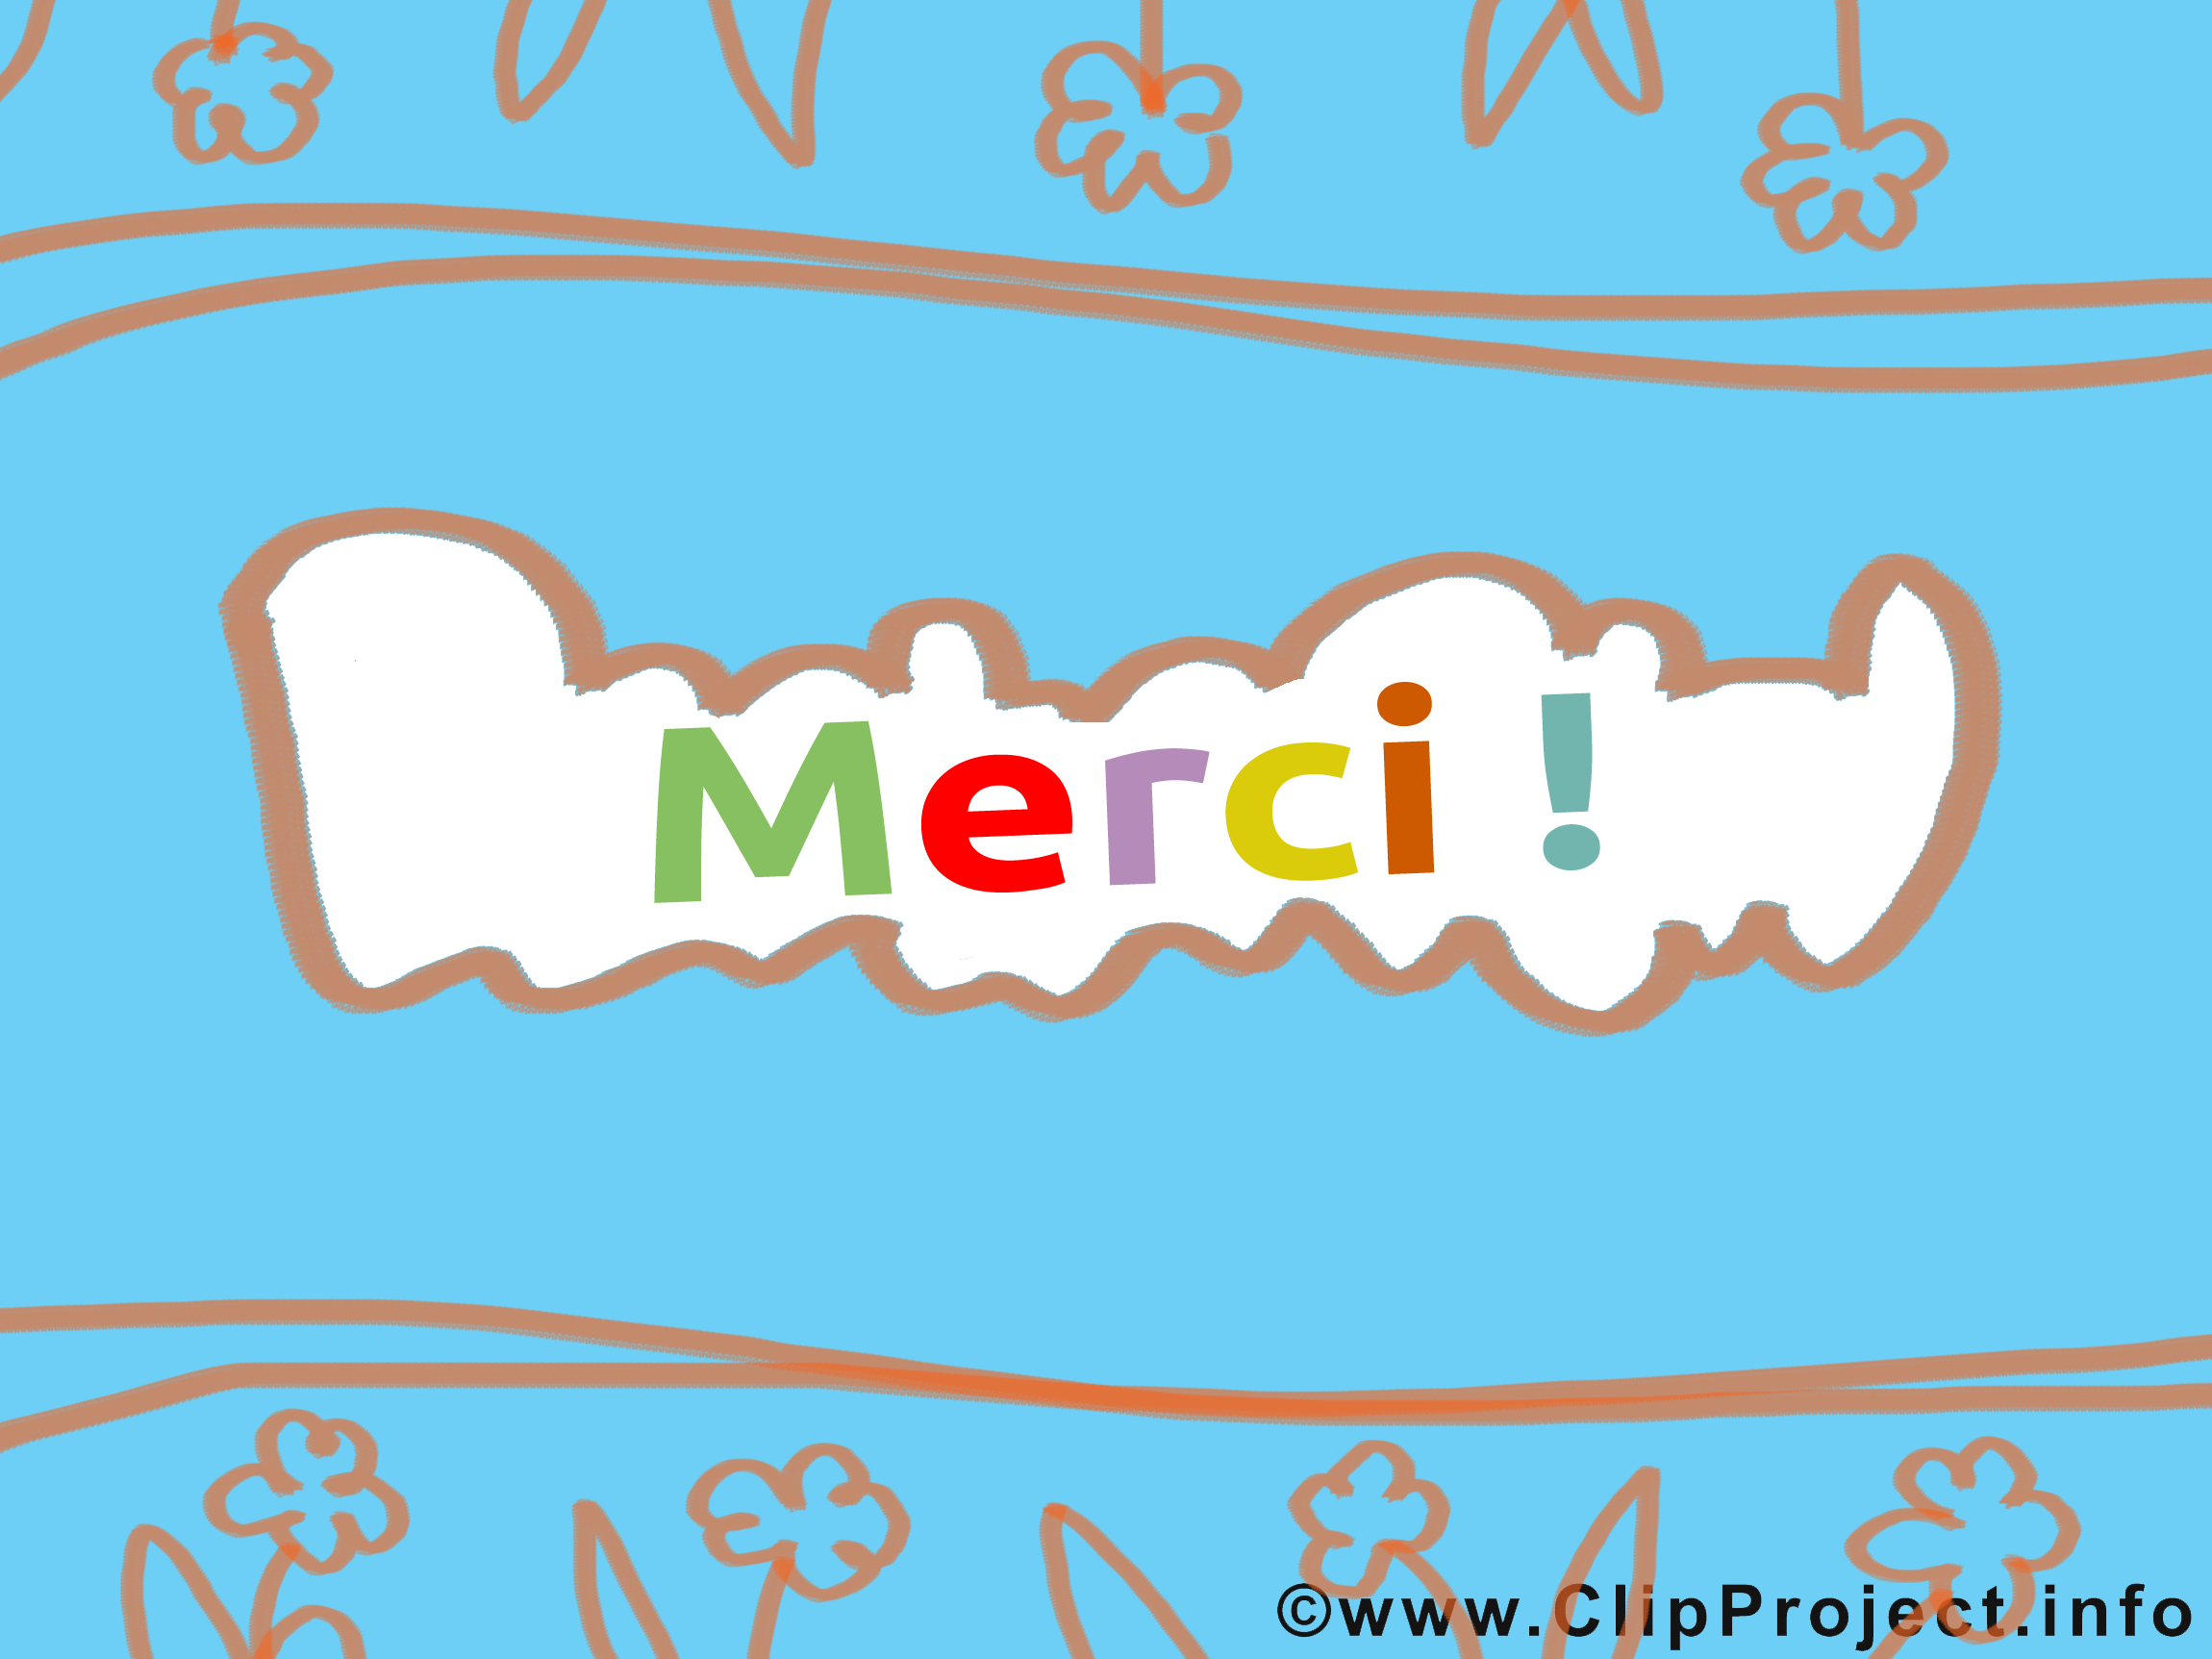 Merci beaucoup image cliparts